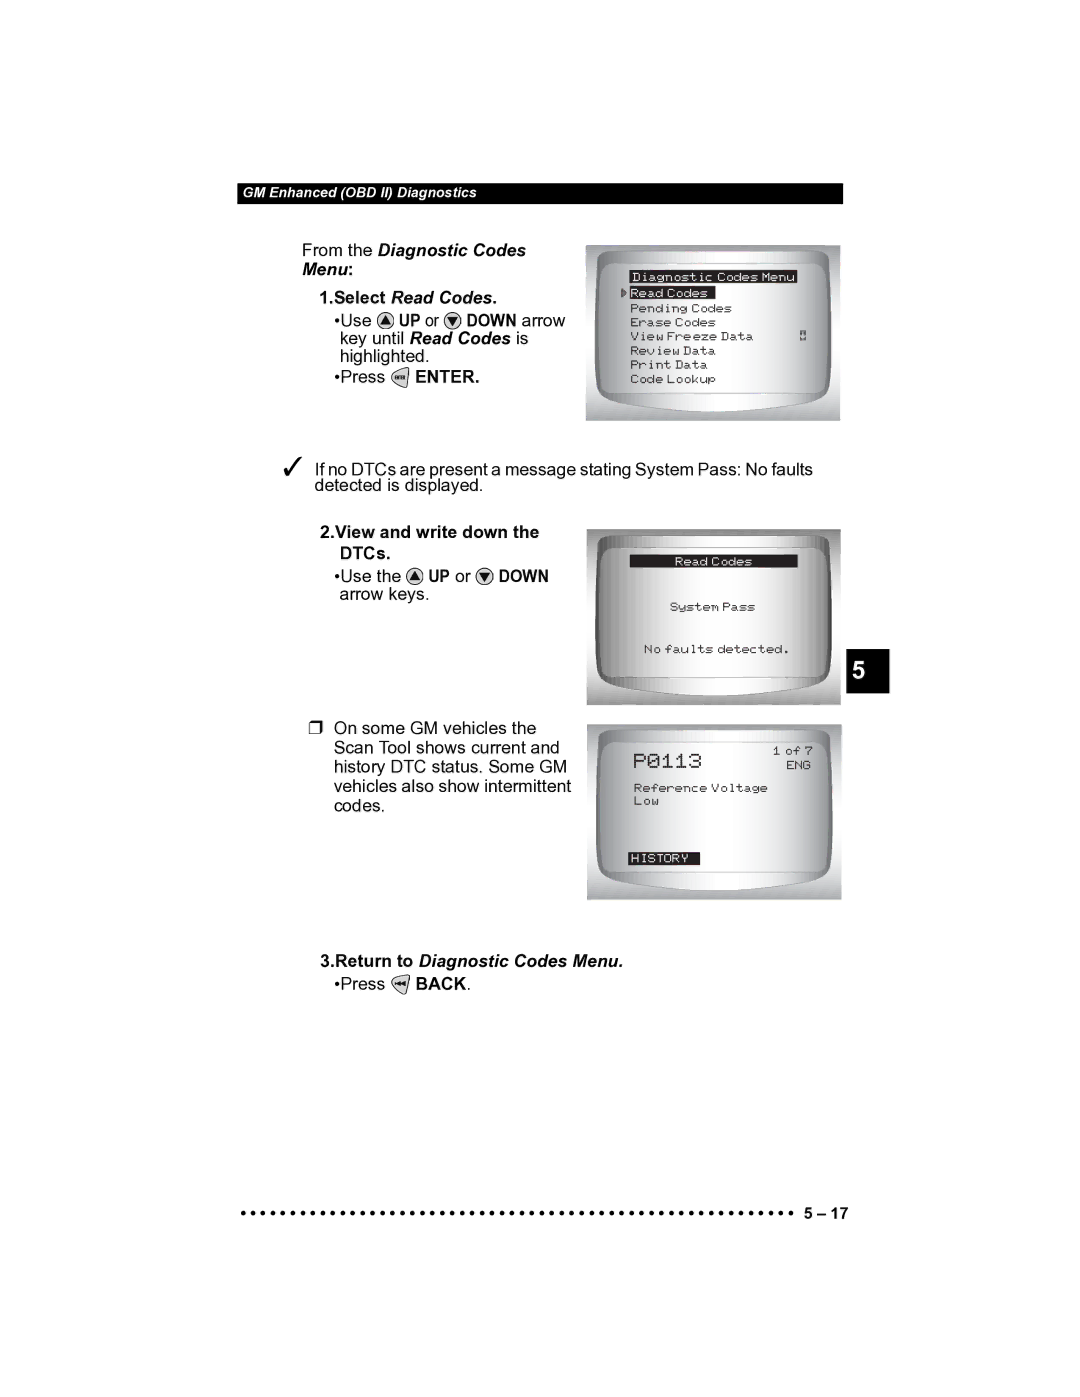 Actron CP9185 manual View and write down the DTCs, Return to Diagnostic Codes Menu. Press Back 